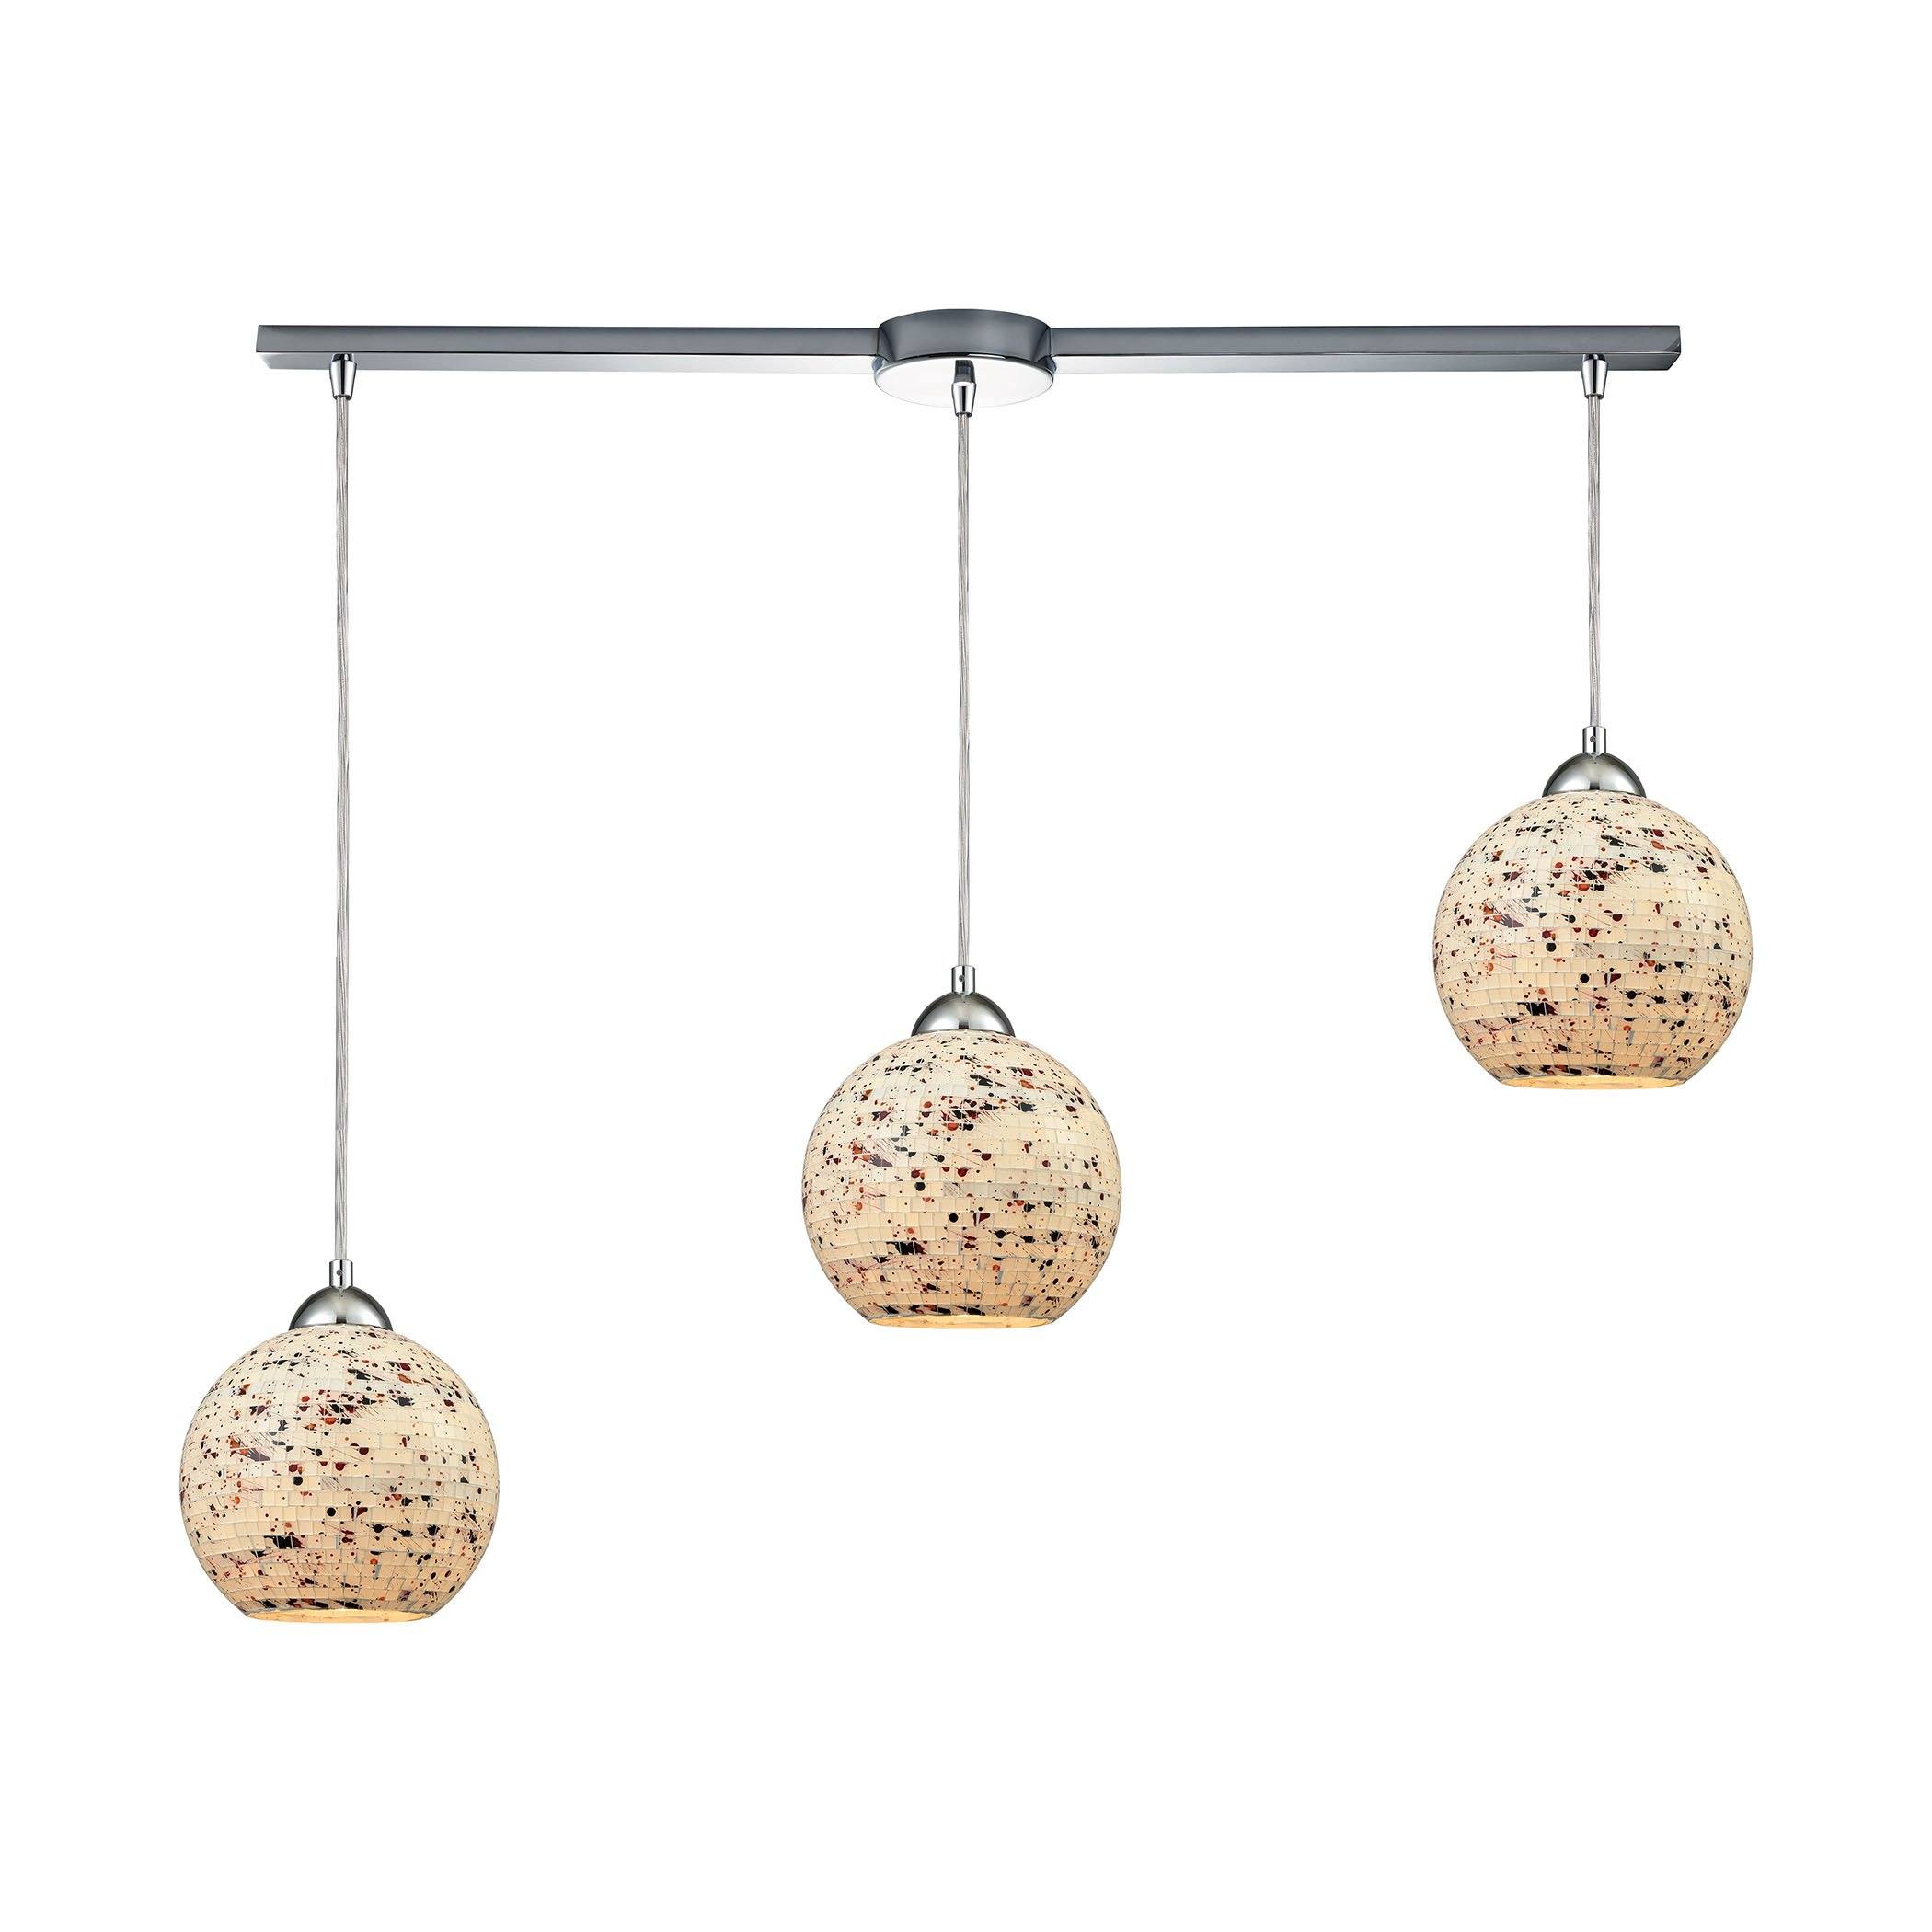 Spatter 3-Light Linear Bar In Polished Chrome With Spatter Mosaic Glass Pendant Ceiling Elk Lighting 